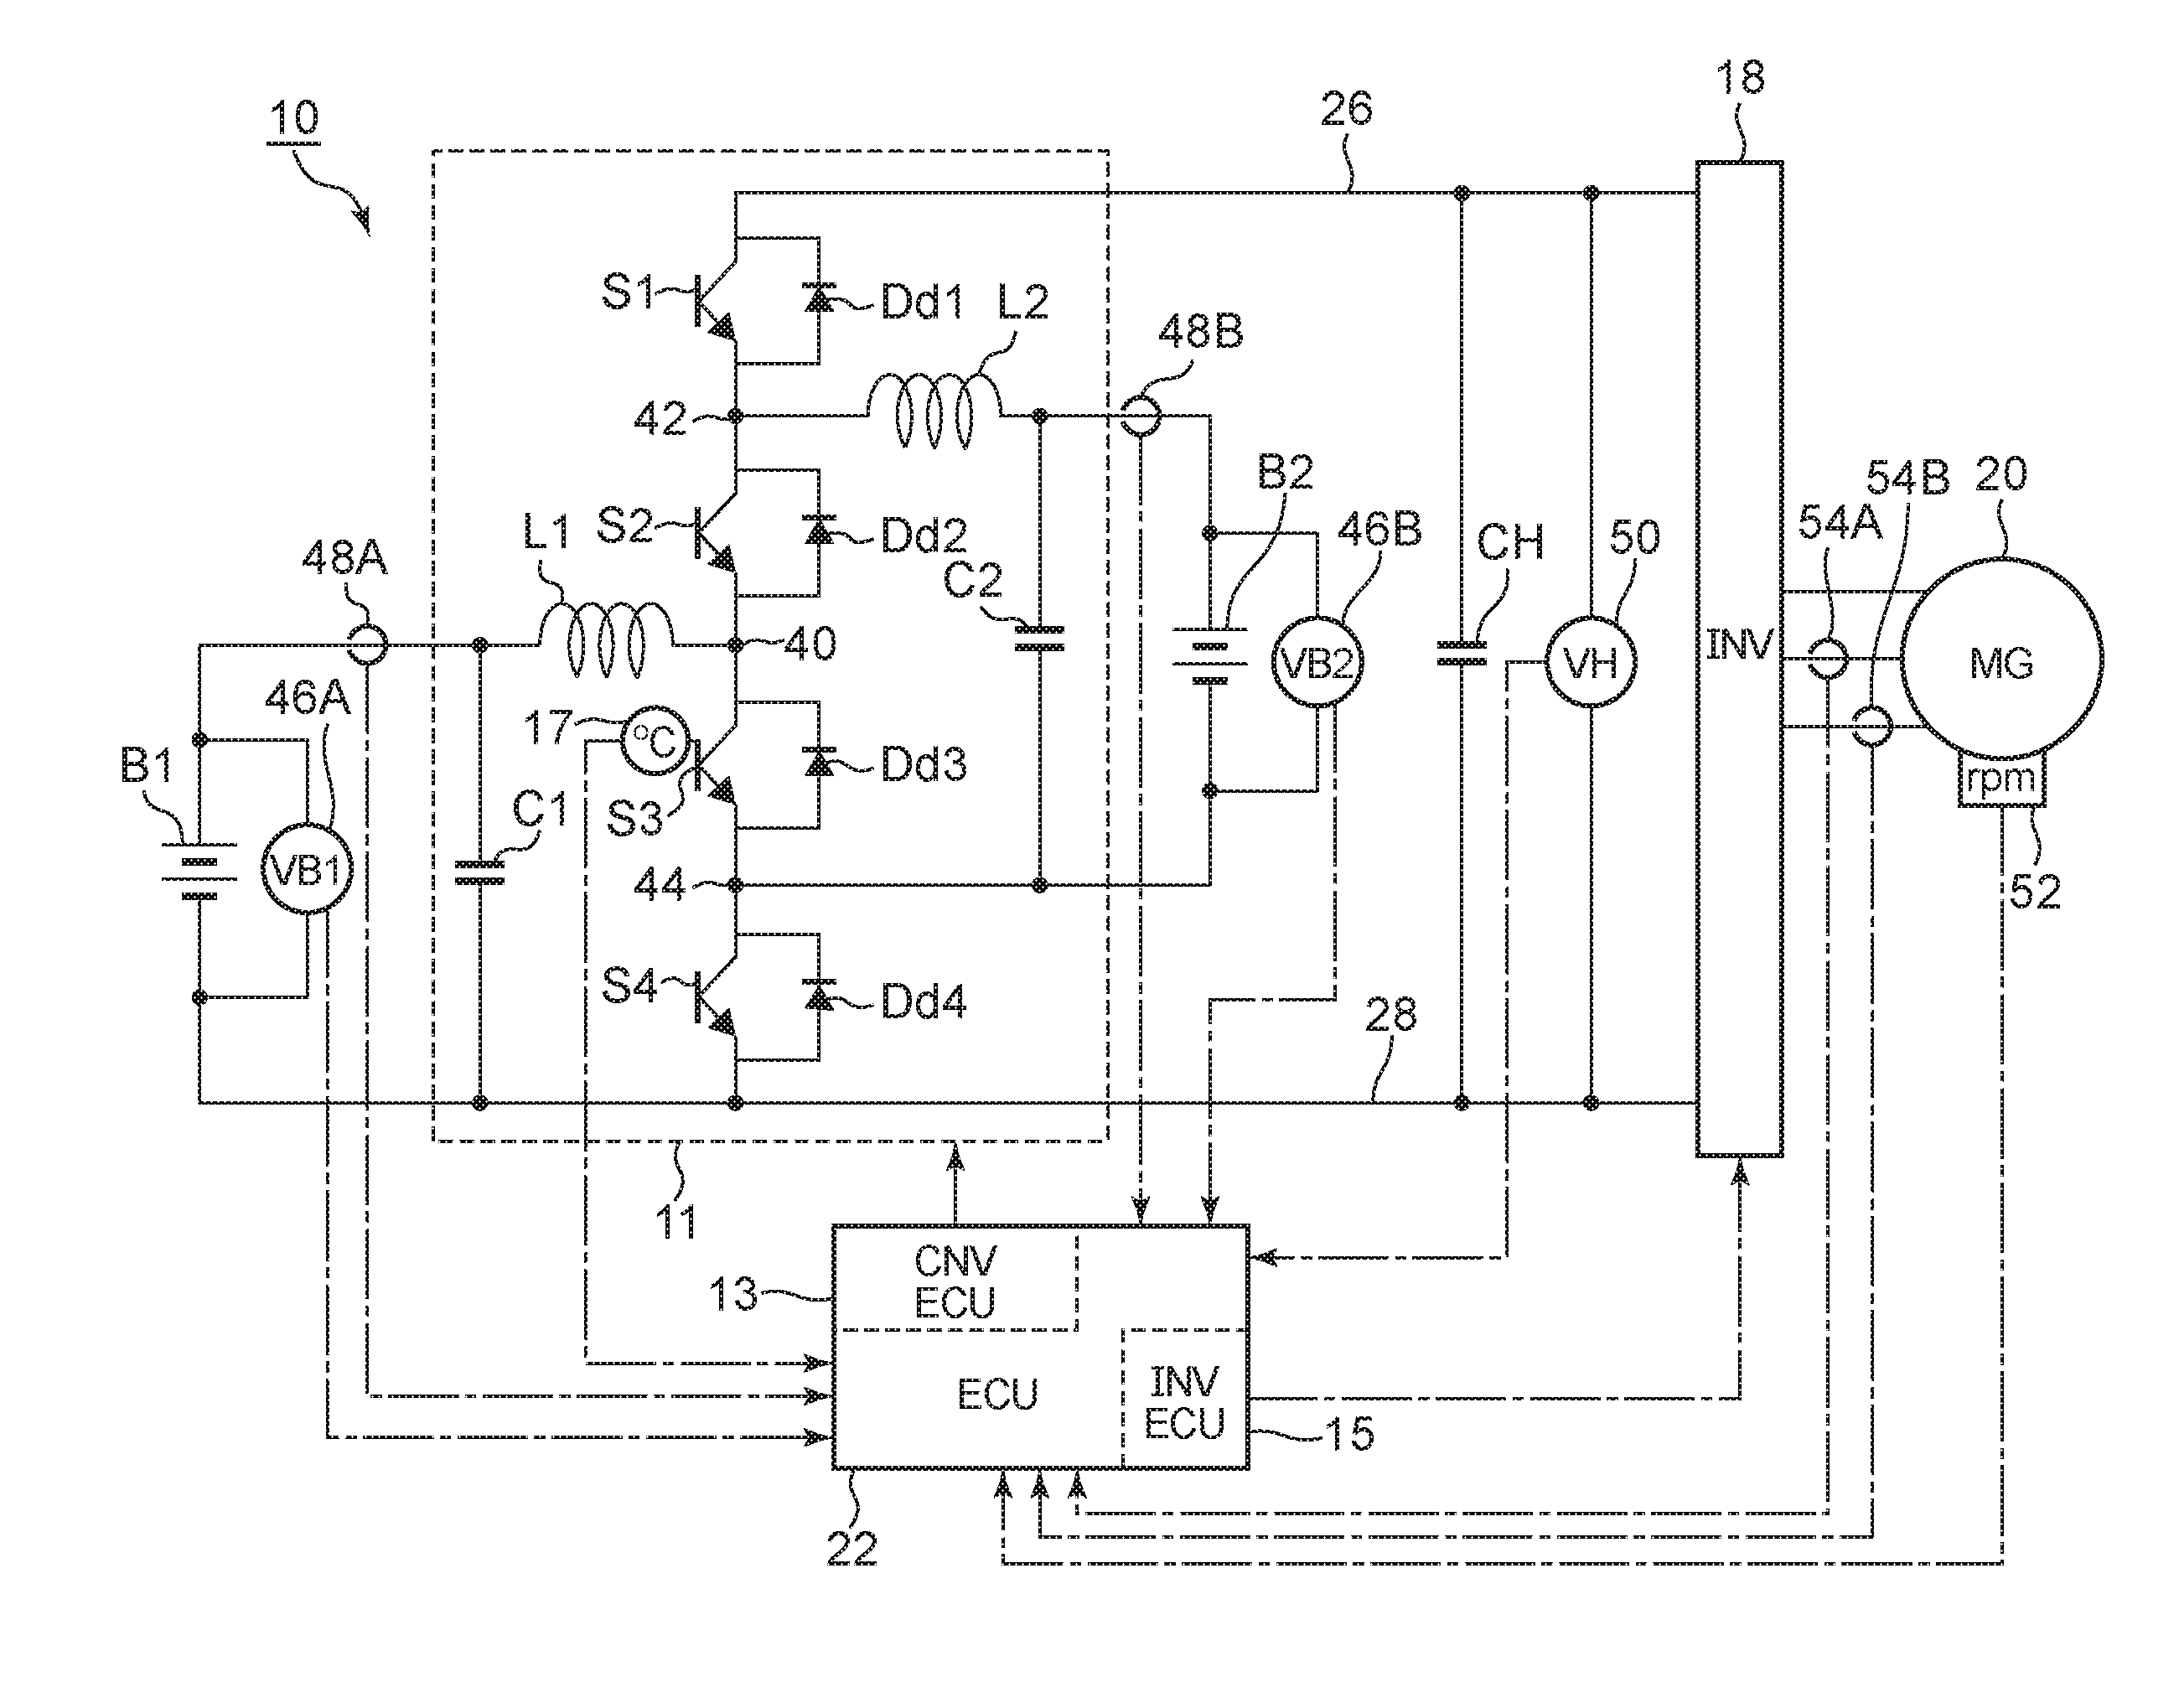 Electric power conversion system